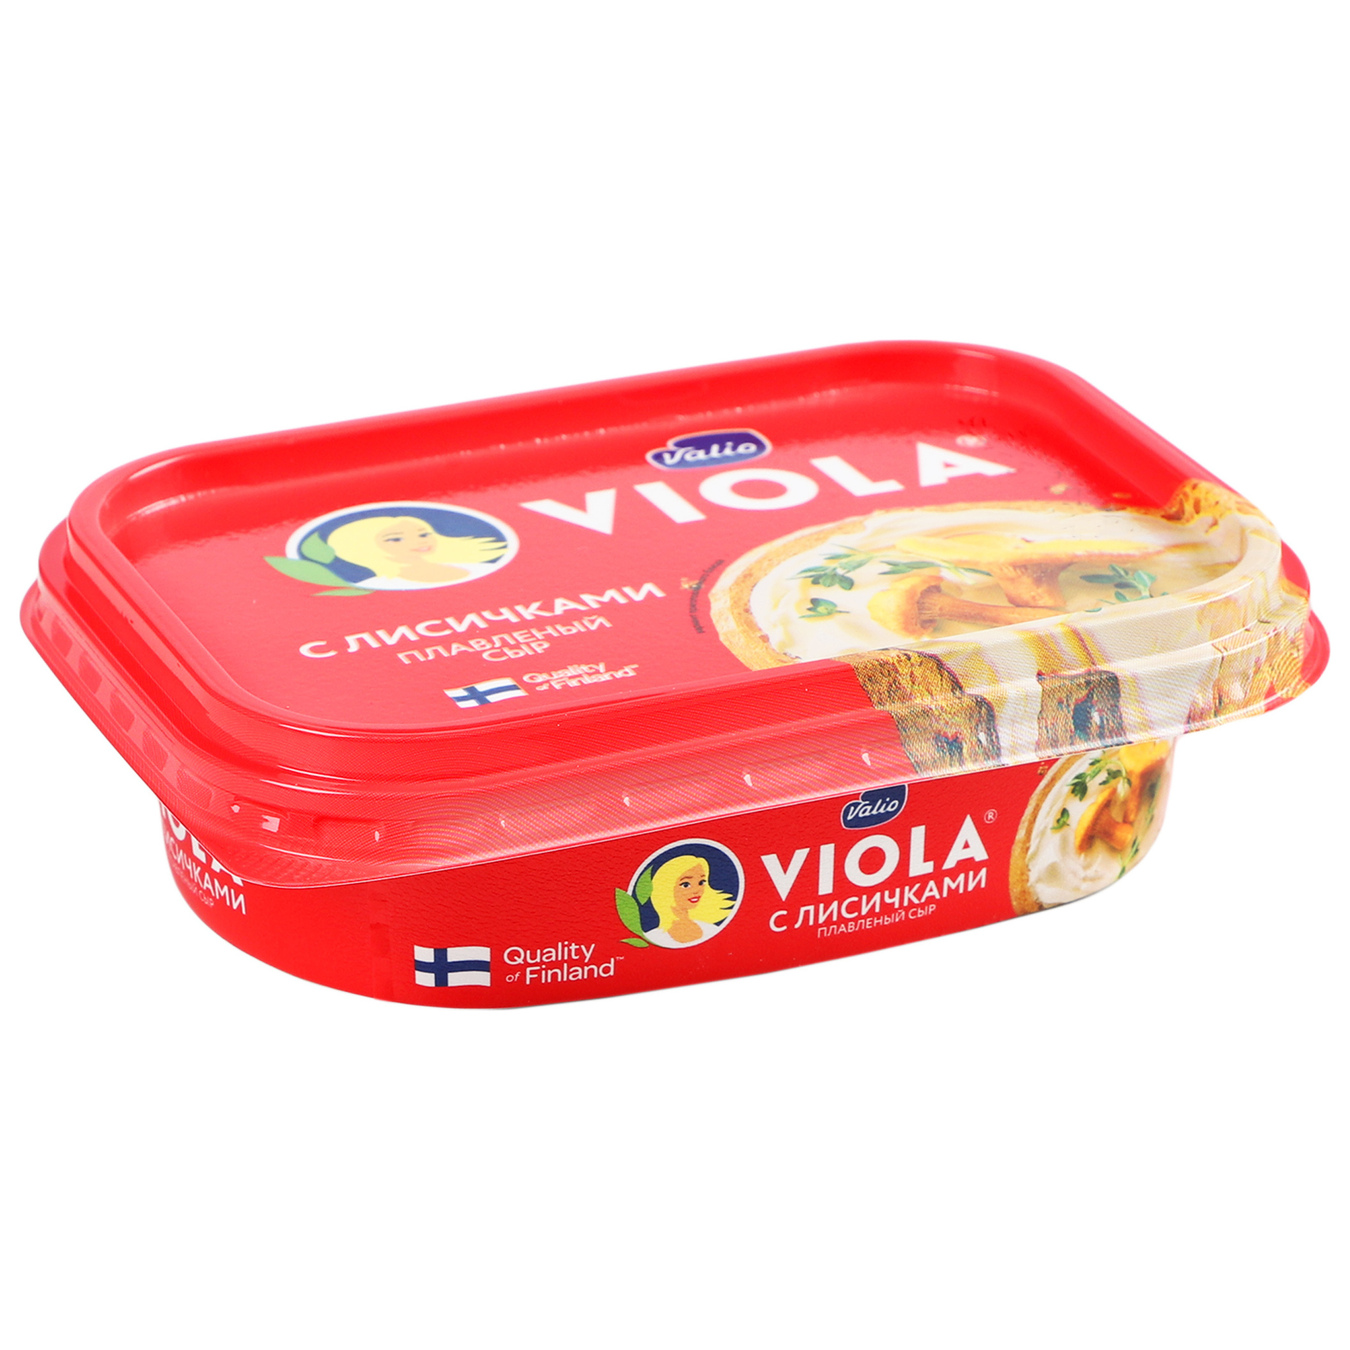 Viola melted cheese with chanterelles 55% 200g 2